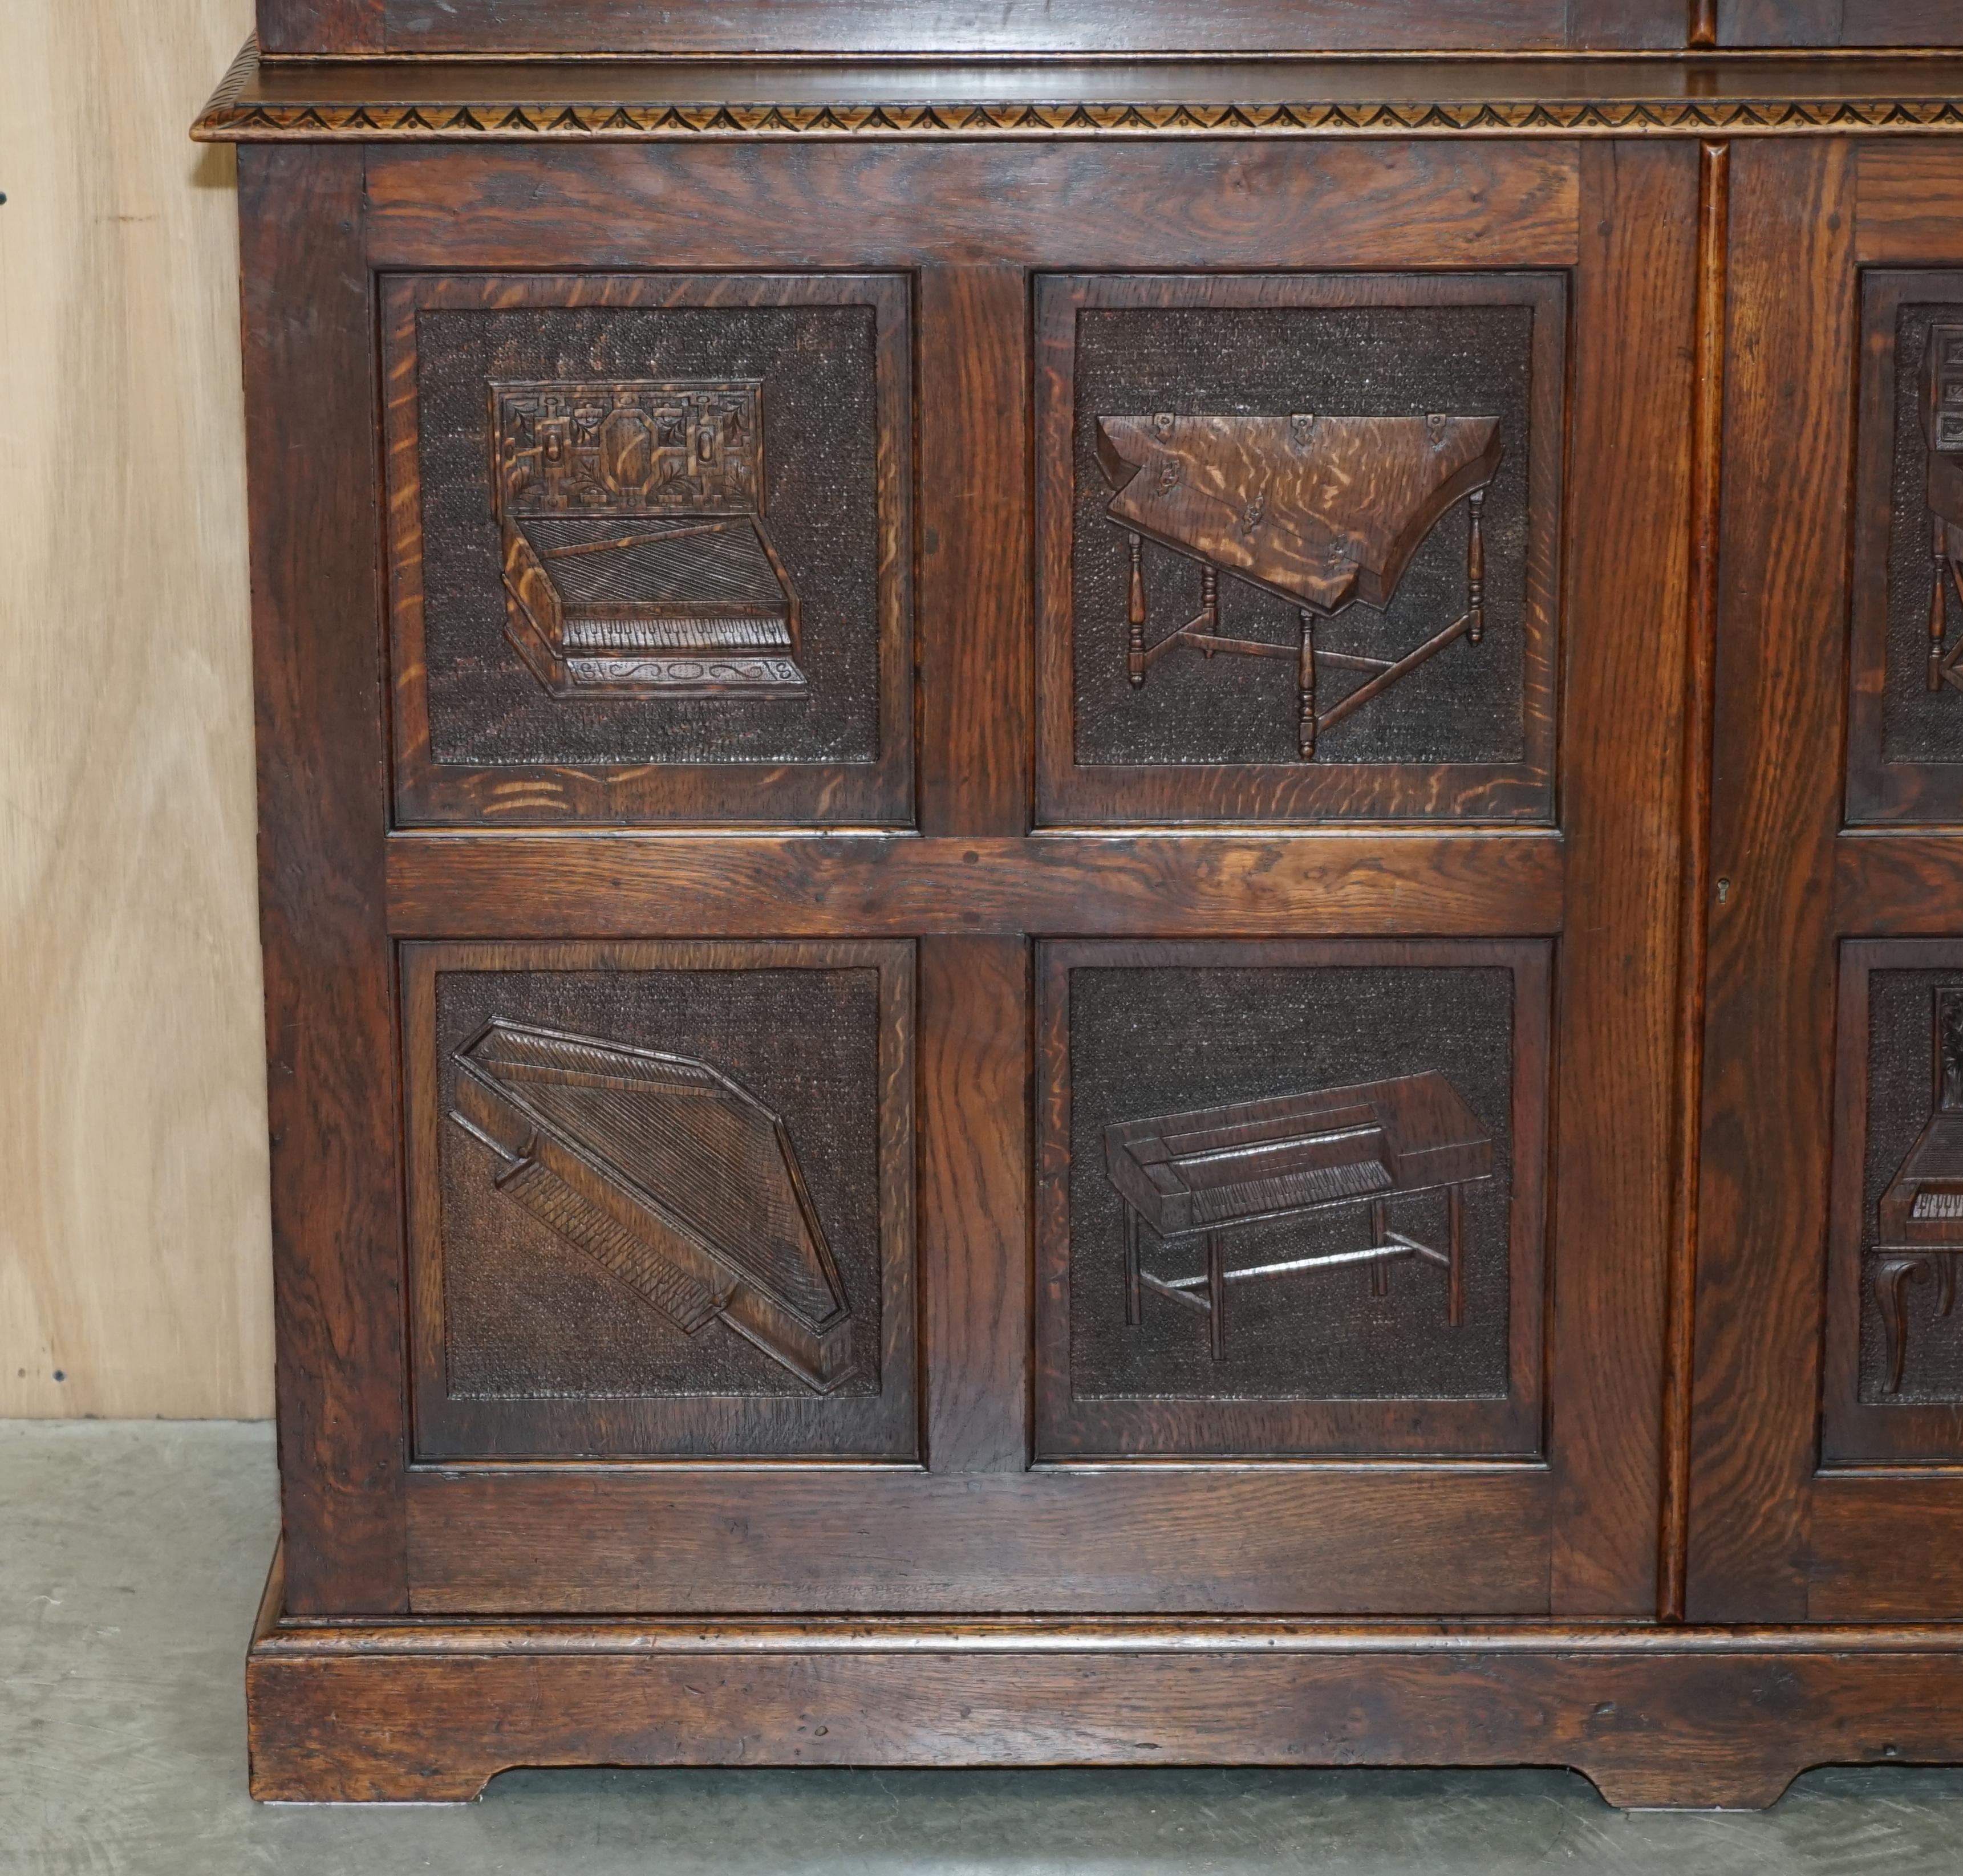 IMPORTANT CARVED BOOKCASE CABiNET FROM THE BATE COLLECTION IN OXFORD UNIVERSITY For Sale 2